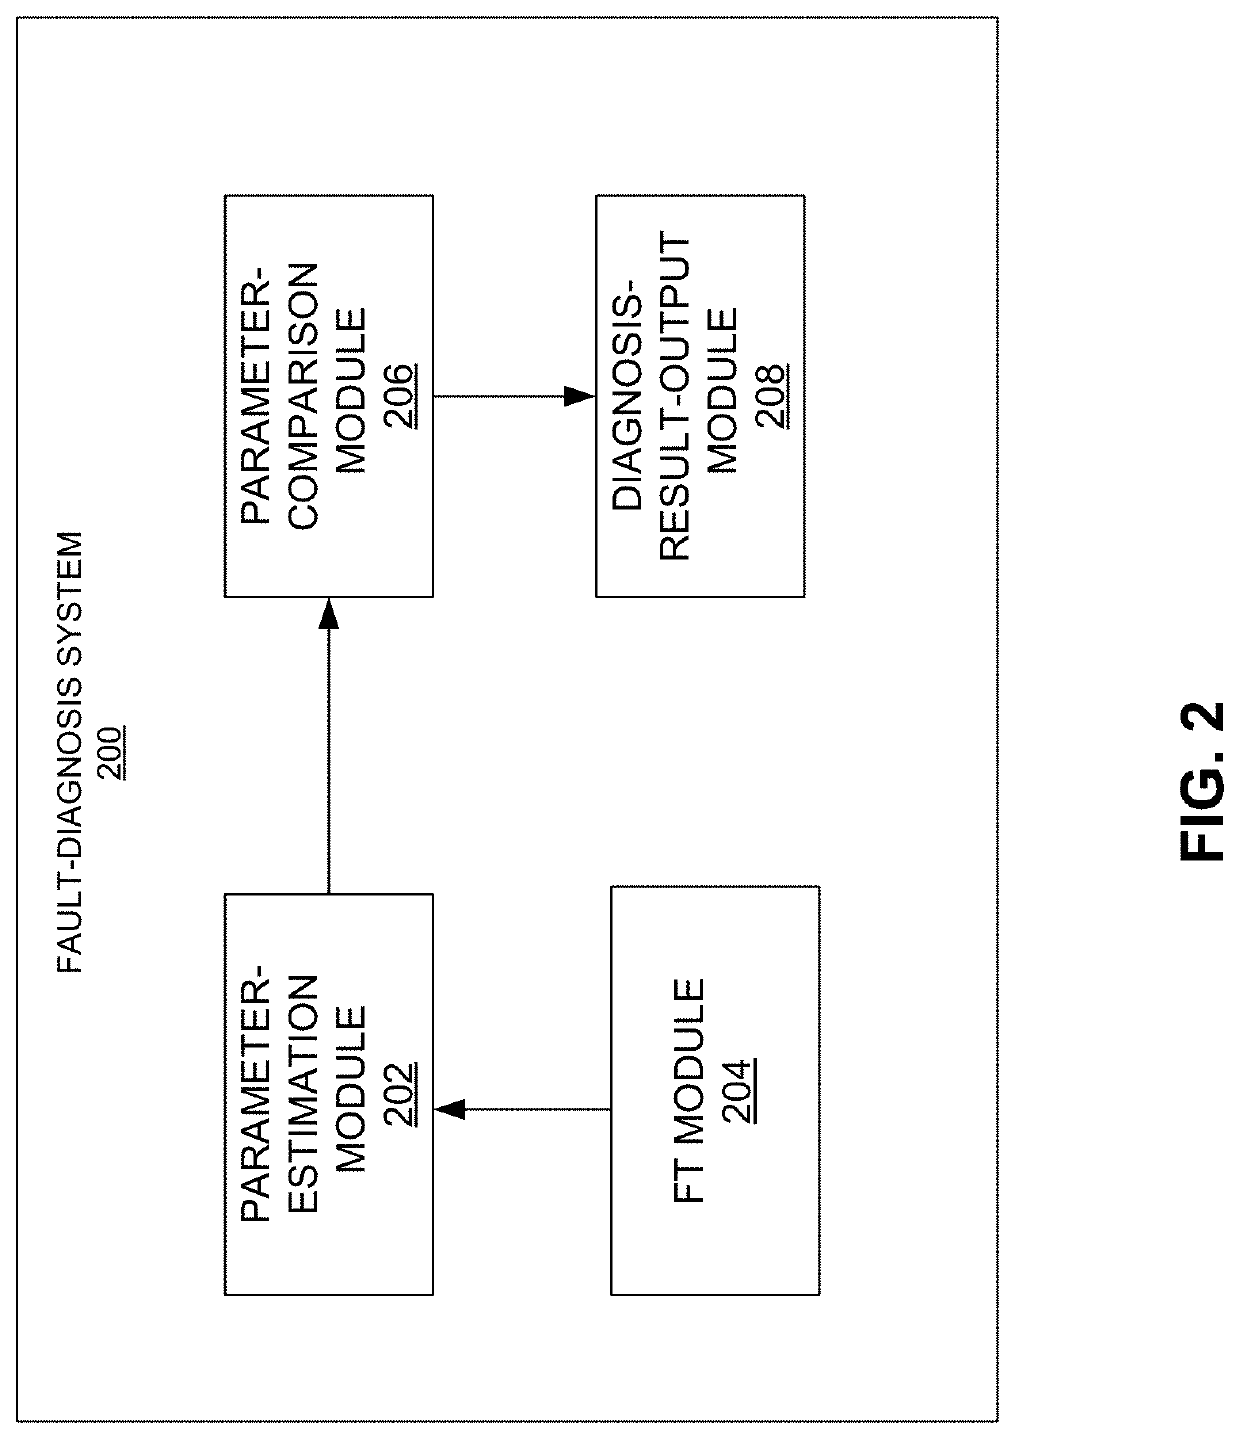 Model-based diagnosis in frequency domain